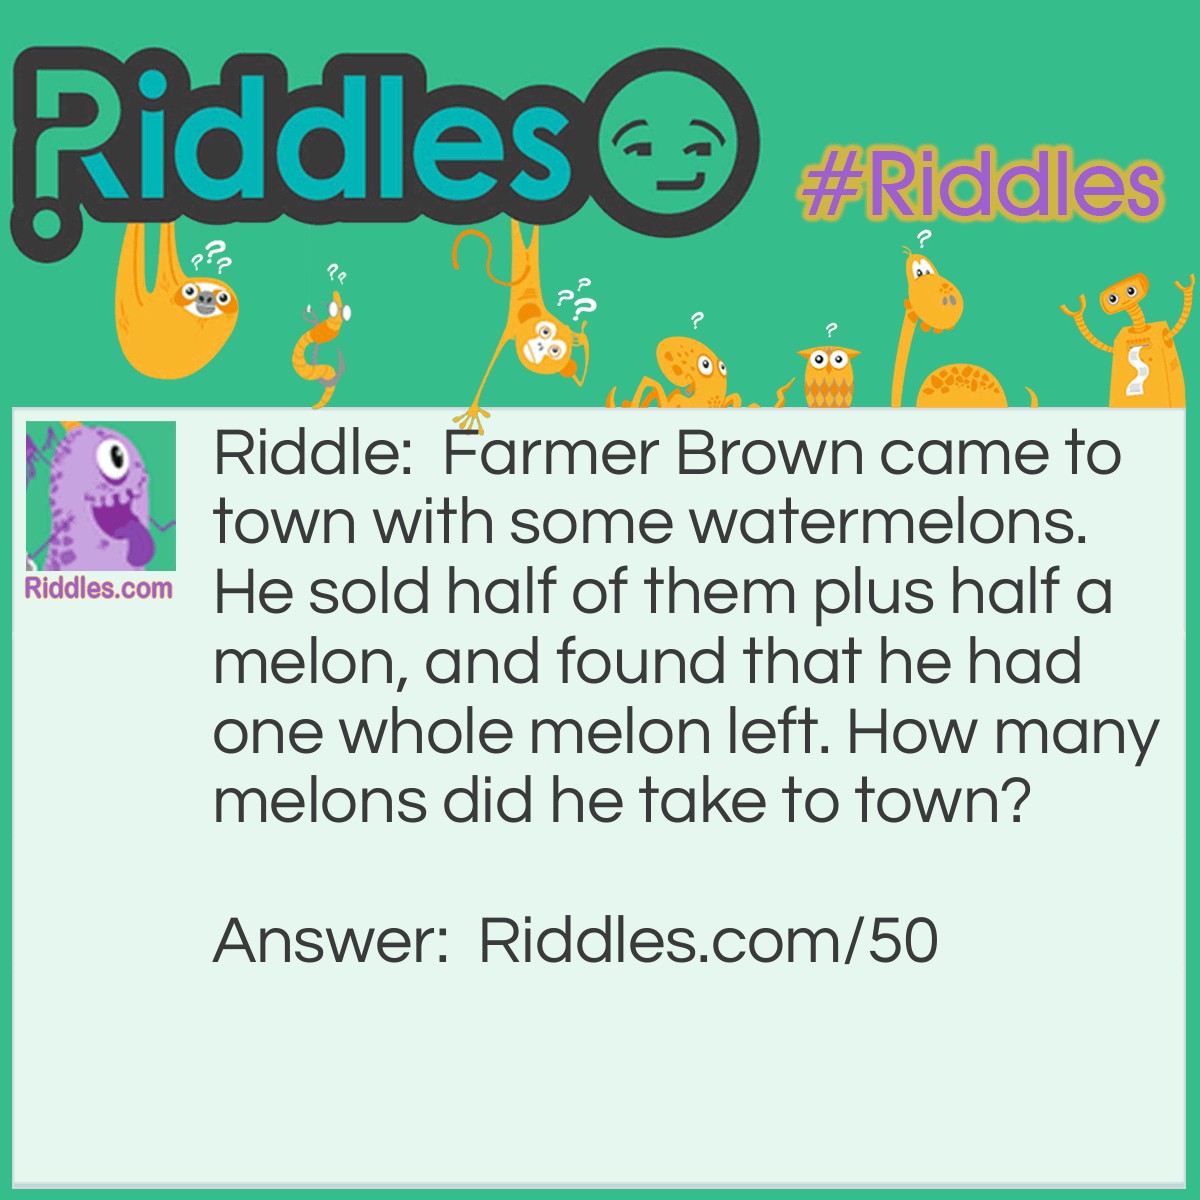 Riddle: Farmer Brown came to town with some watermelons. He sold half of them plus half a melon, and found that he had one whole melon left. How many melons did he take to town? Answer: Three melons!